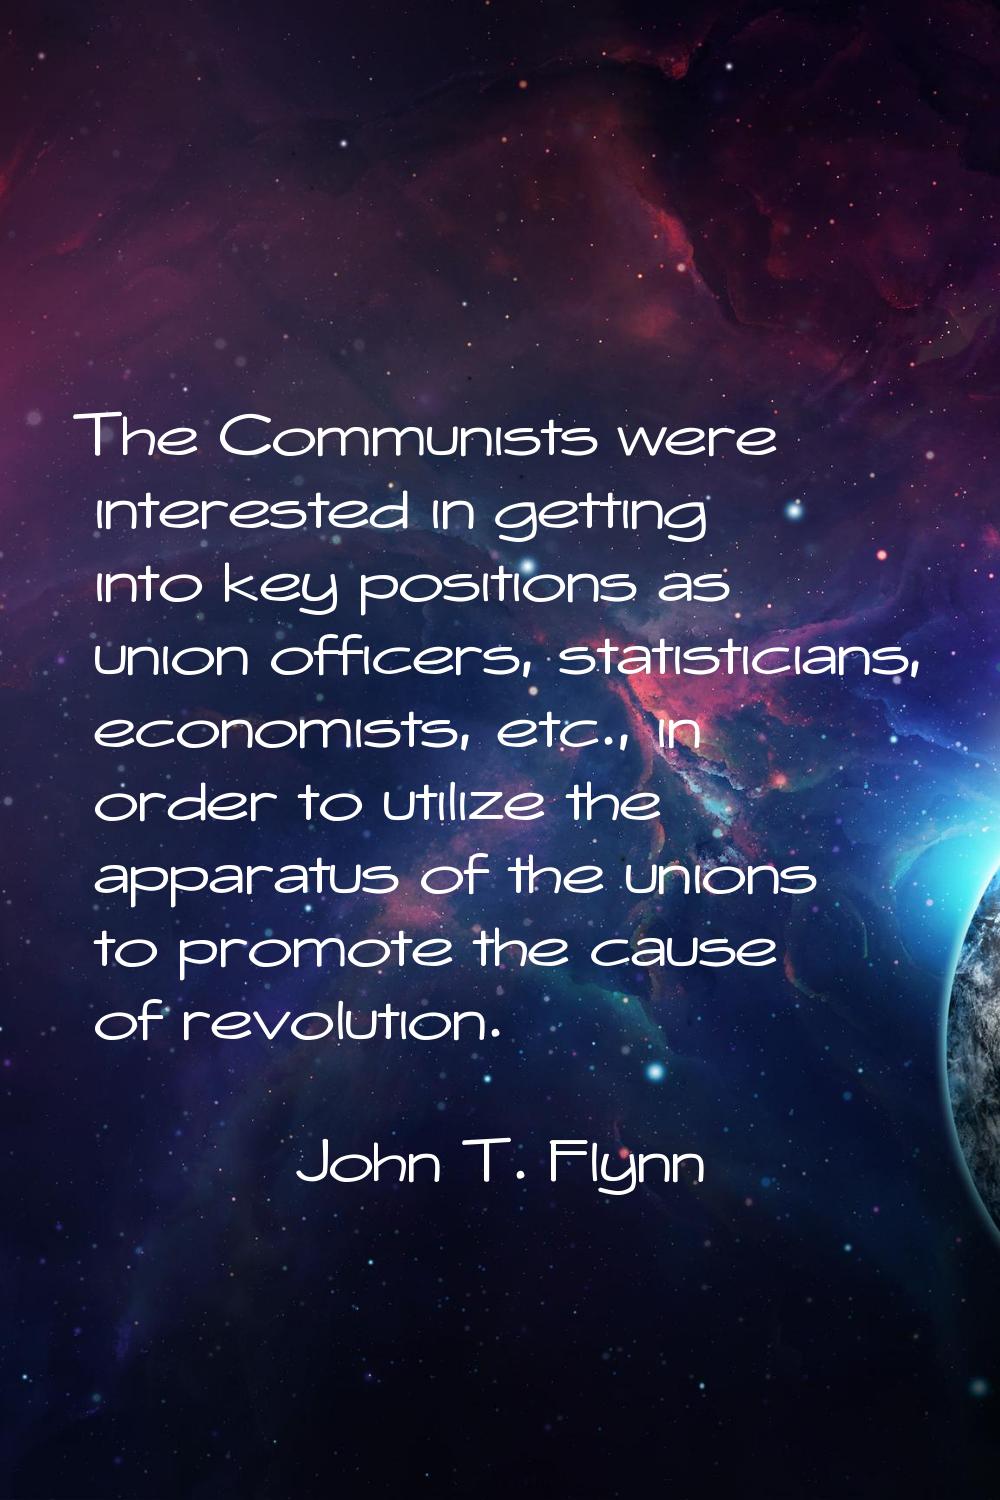 The Communists were interested in getting into key positions as union officers, statisticians, econ